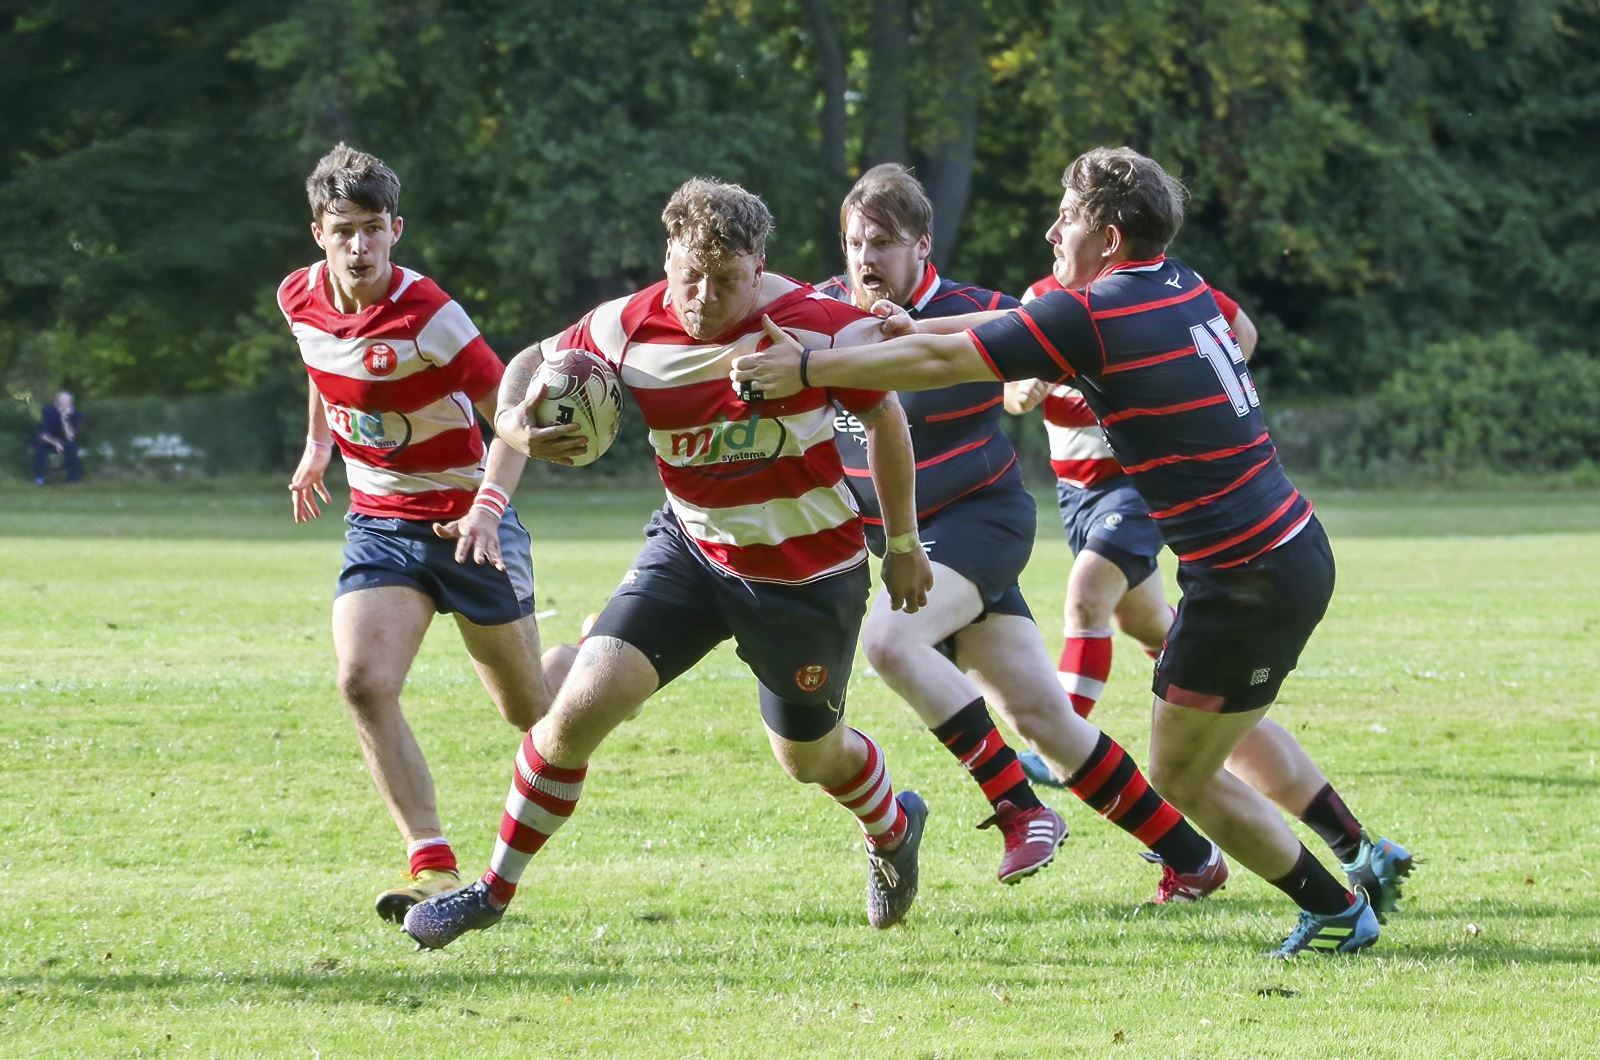 Lewis Scott bustles through for his try, supported by Rory Millar on left. Photo: John MacGregor